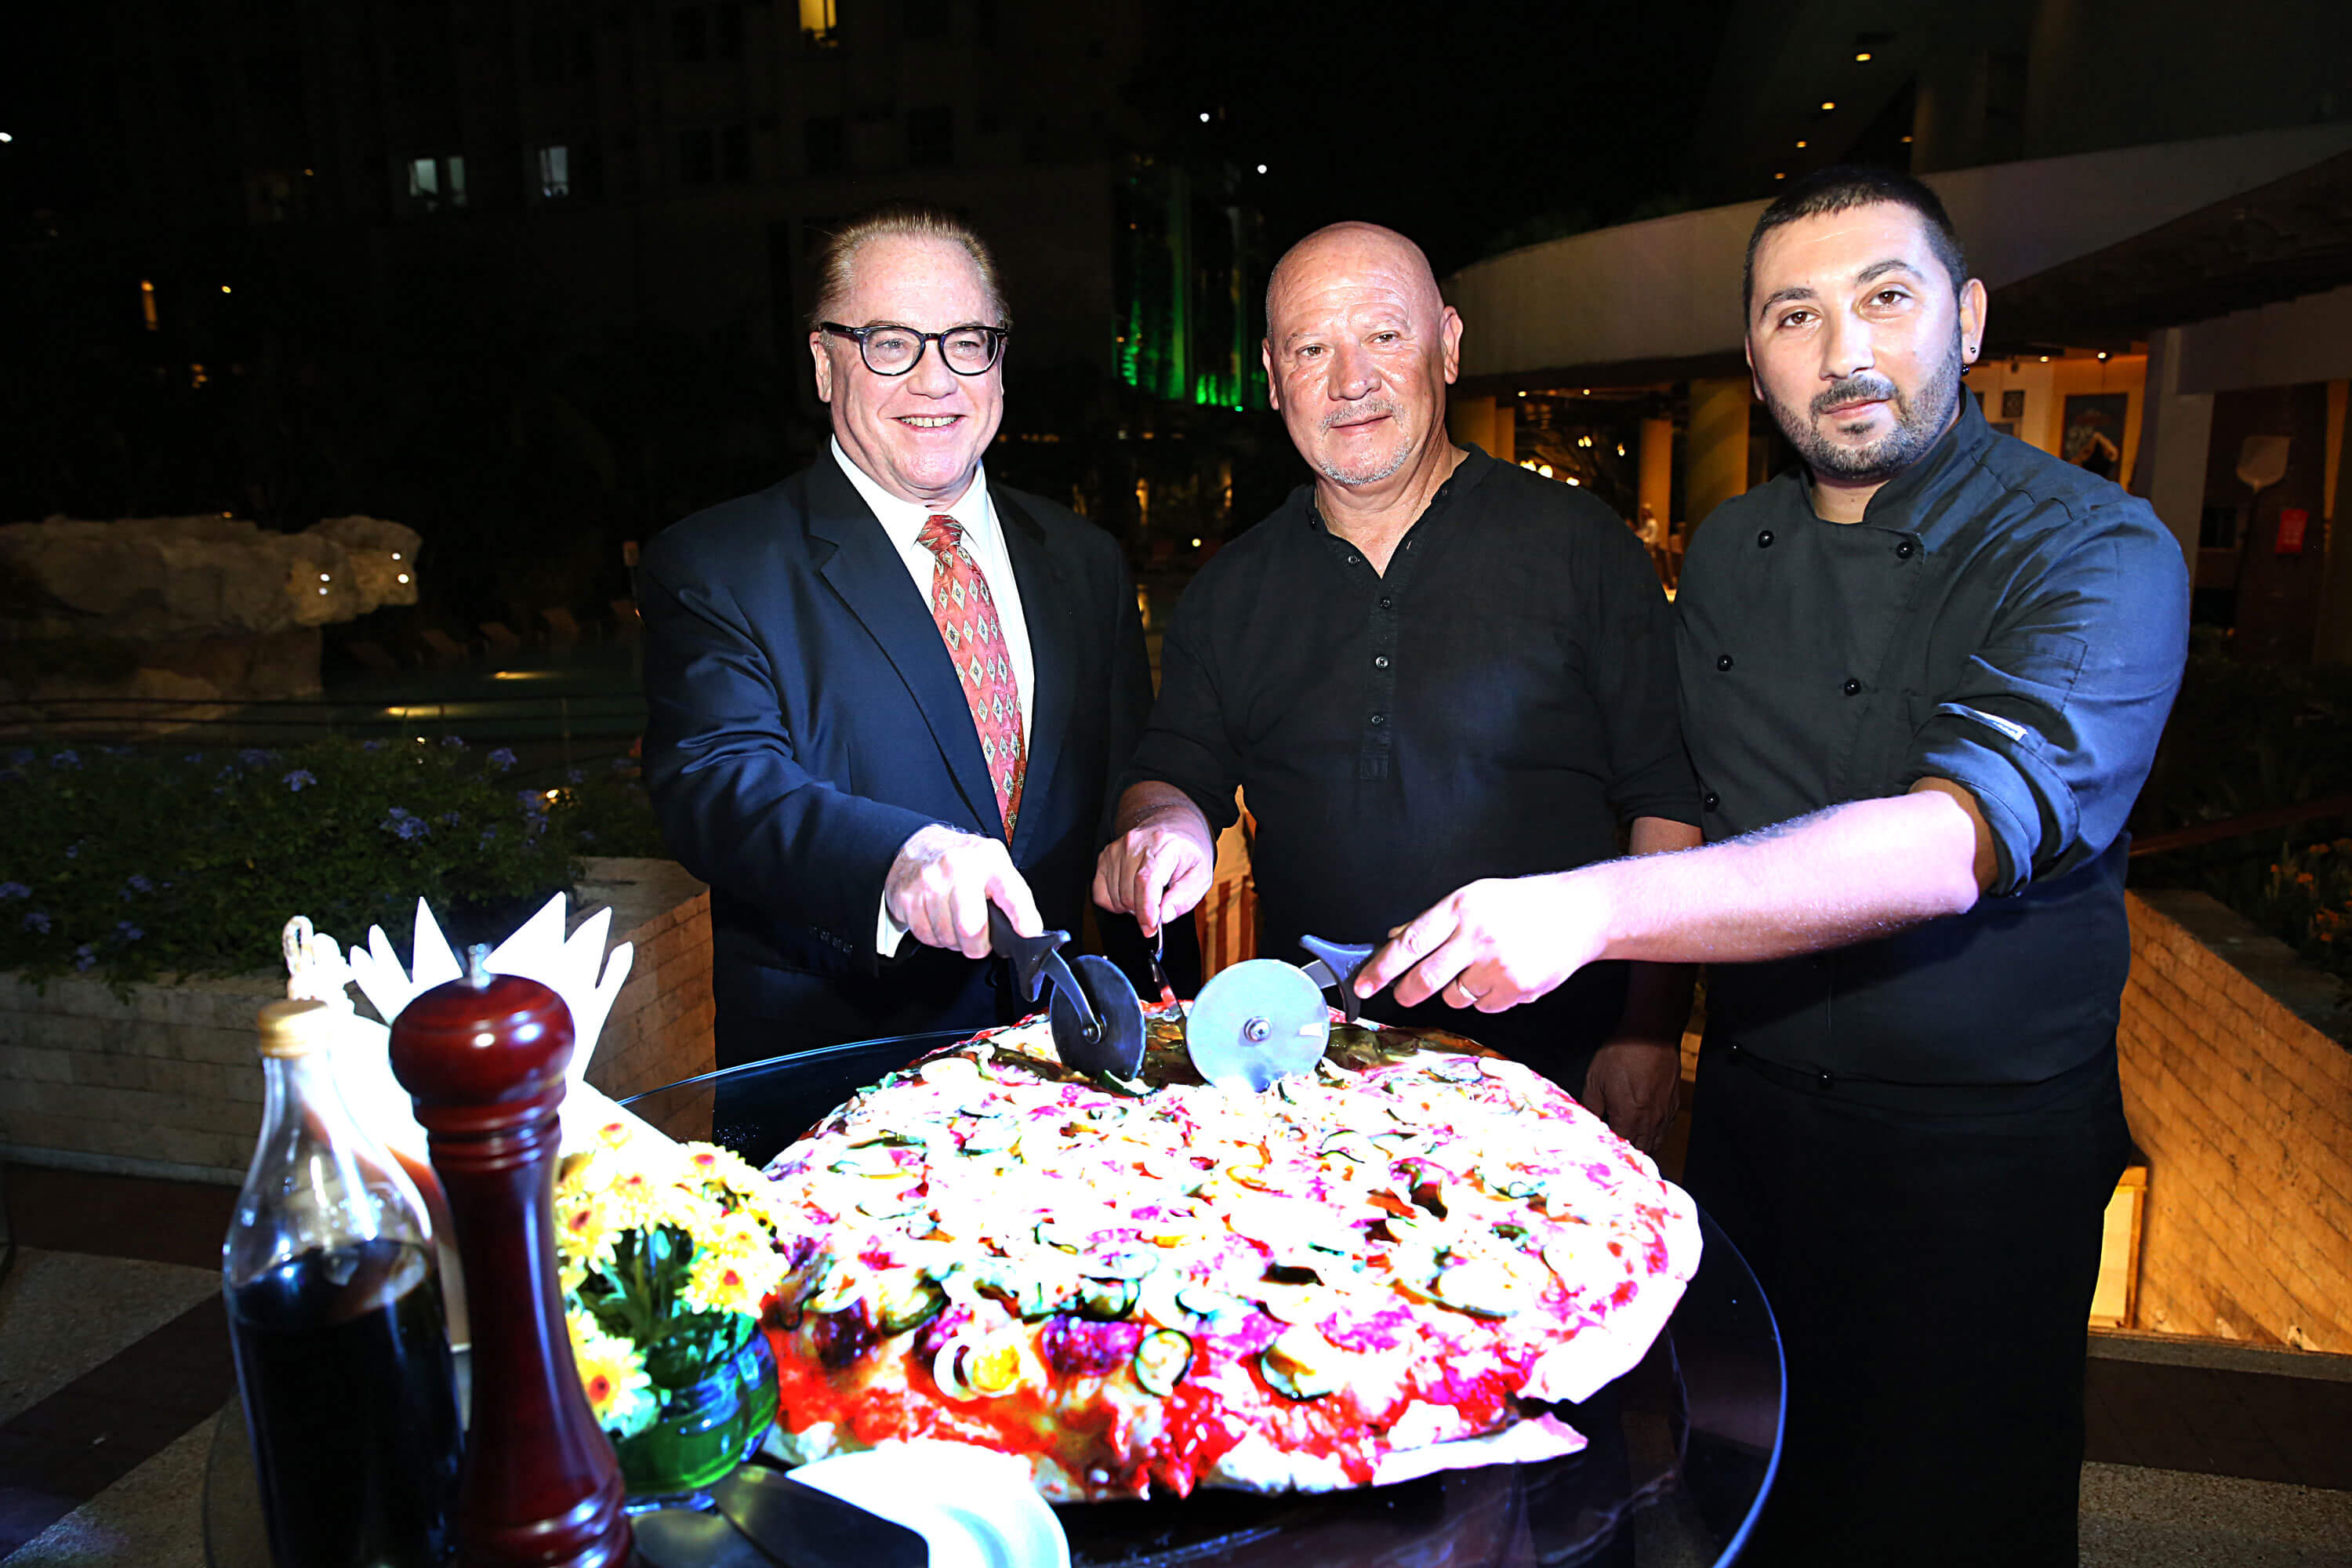 PIZZA SLICING CEREMONY. Opening La Dolce Vita with a pizza-slicing ceremony are (from left) Marco Polo Plaza General Manager Brian Connelly and guest chefs Giuseppe Genco and Luca Genco.